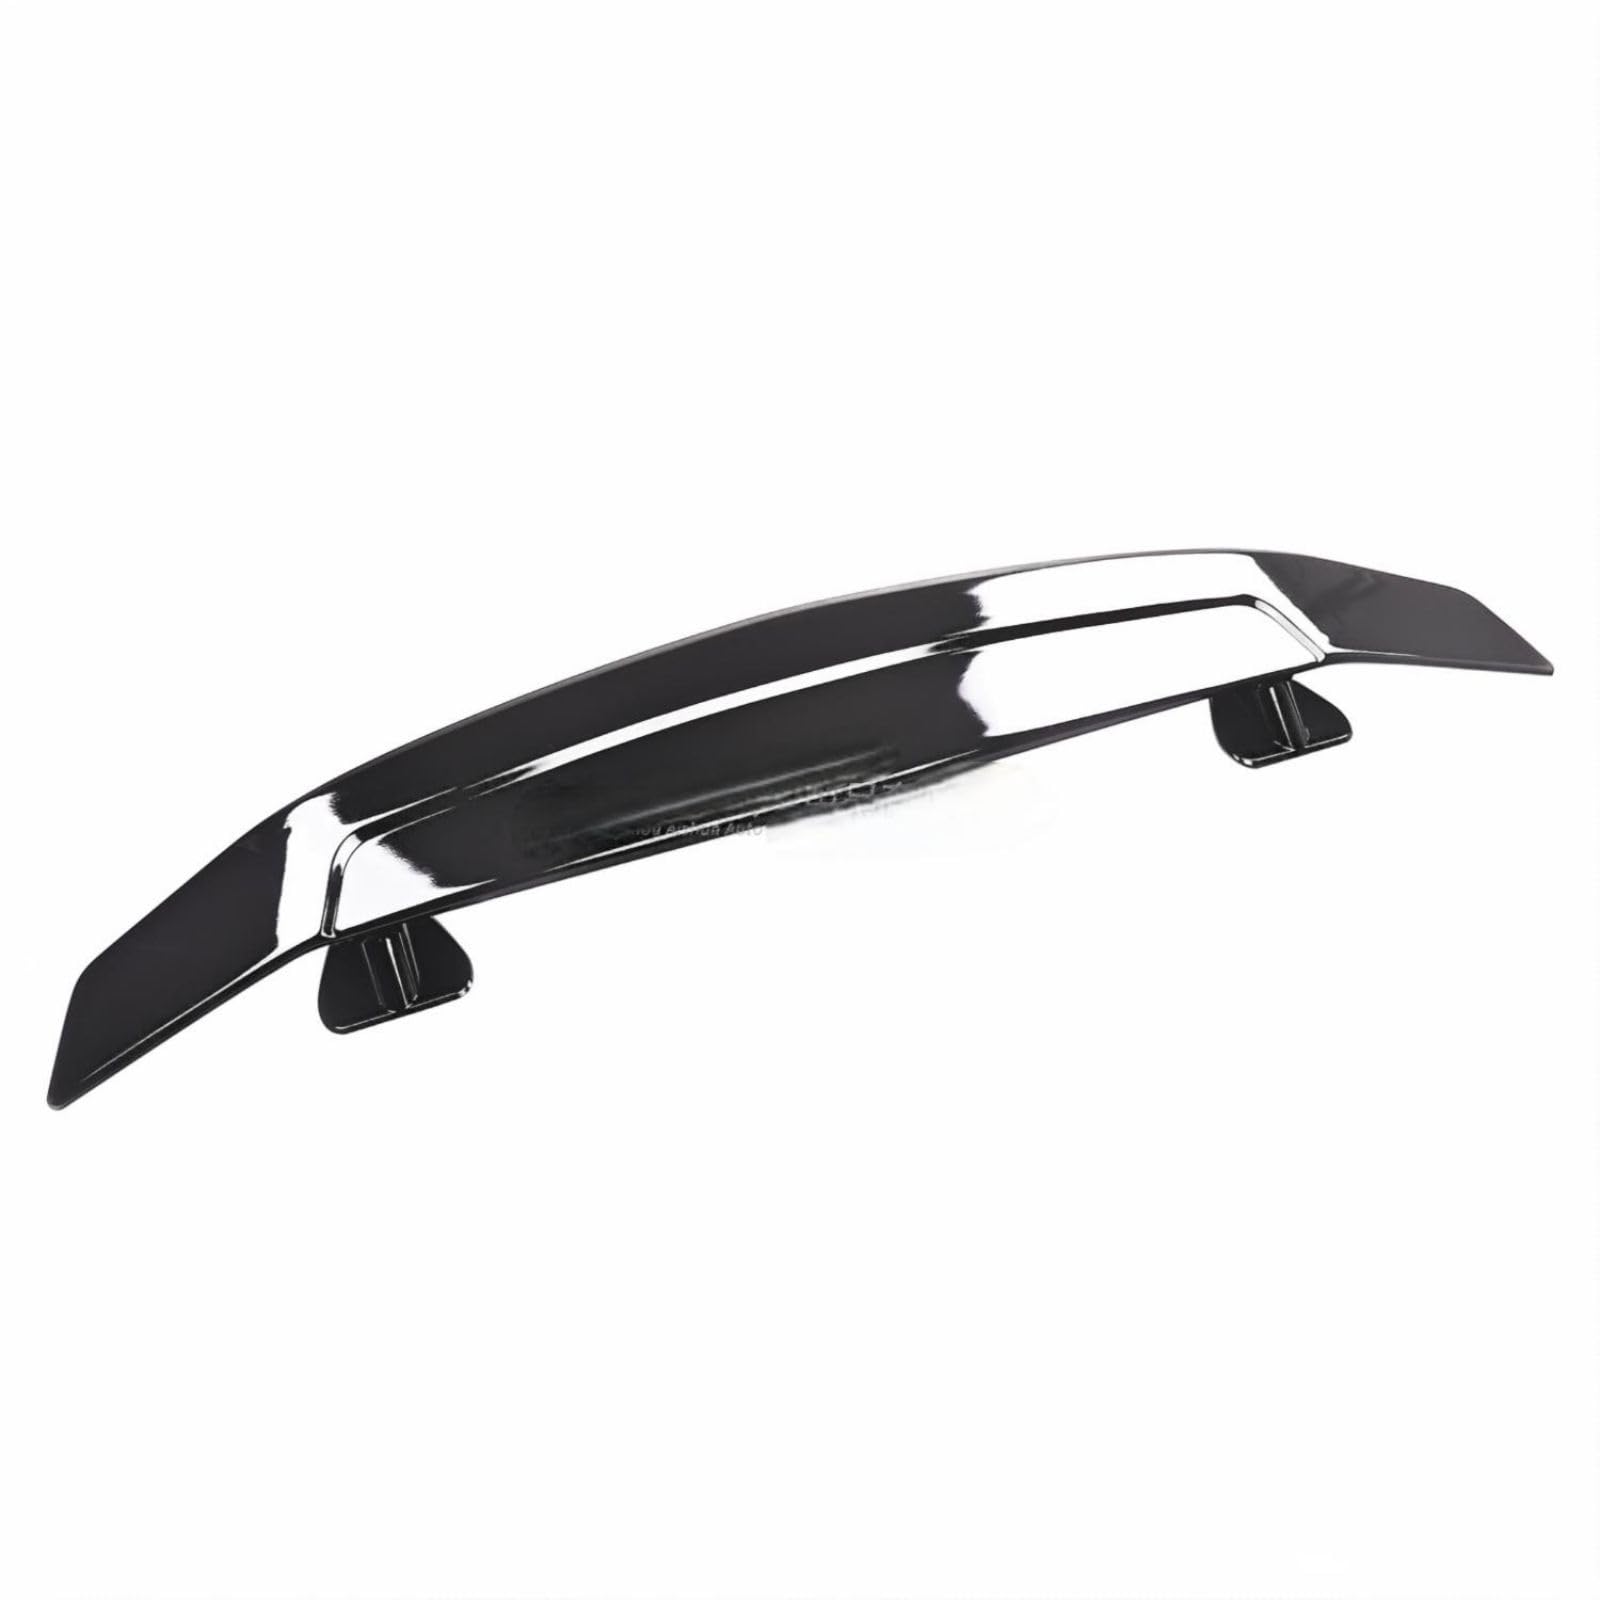 Car Rear Window Spoiler for Amaze I 2013-2016, without Perforation Lid Spoiler Wings Installation Rear Wing Decoration,Bright Black von EESWCSZZ3